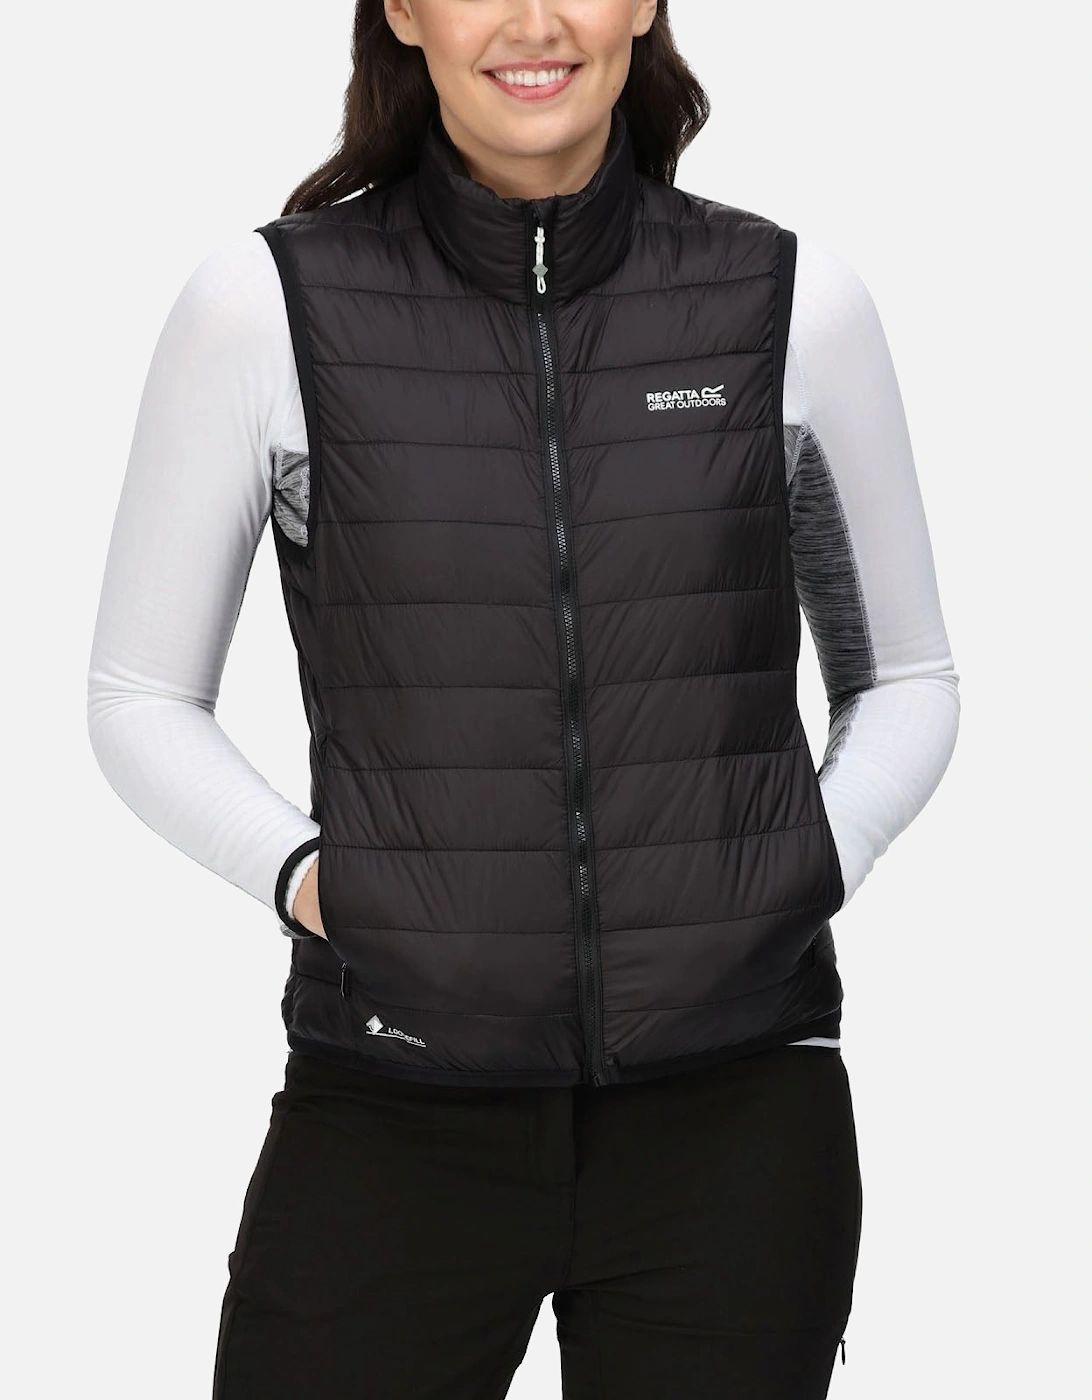 Womens Hillpack Quilted Bodywarmer Gilet